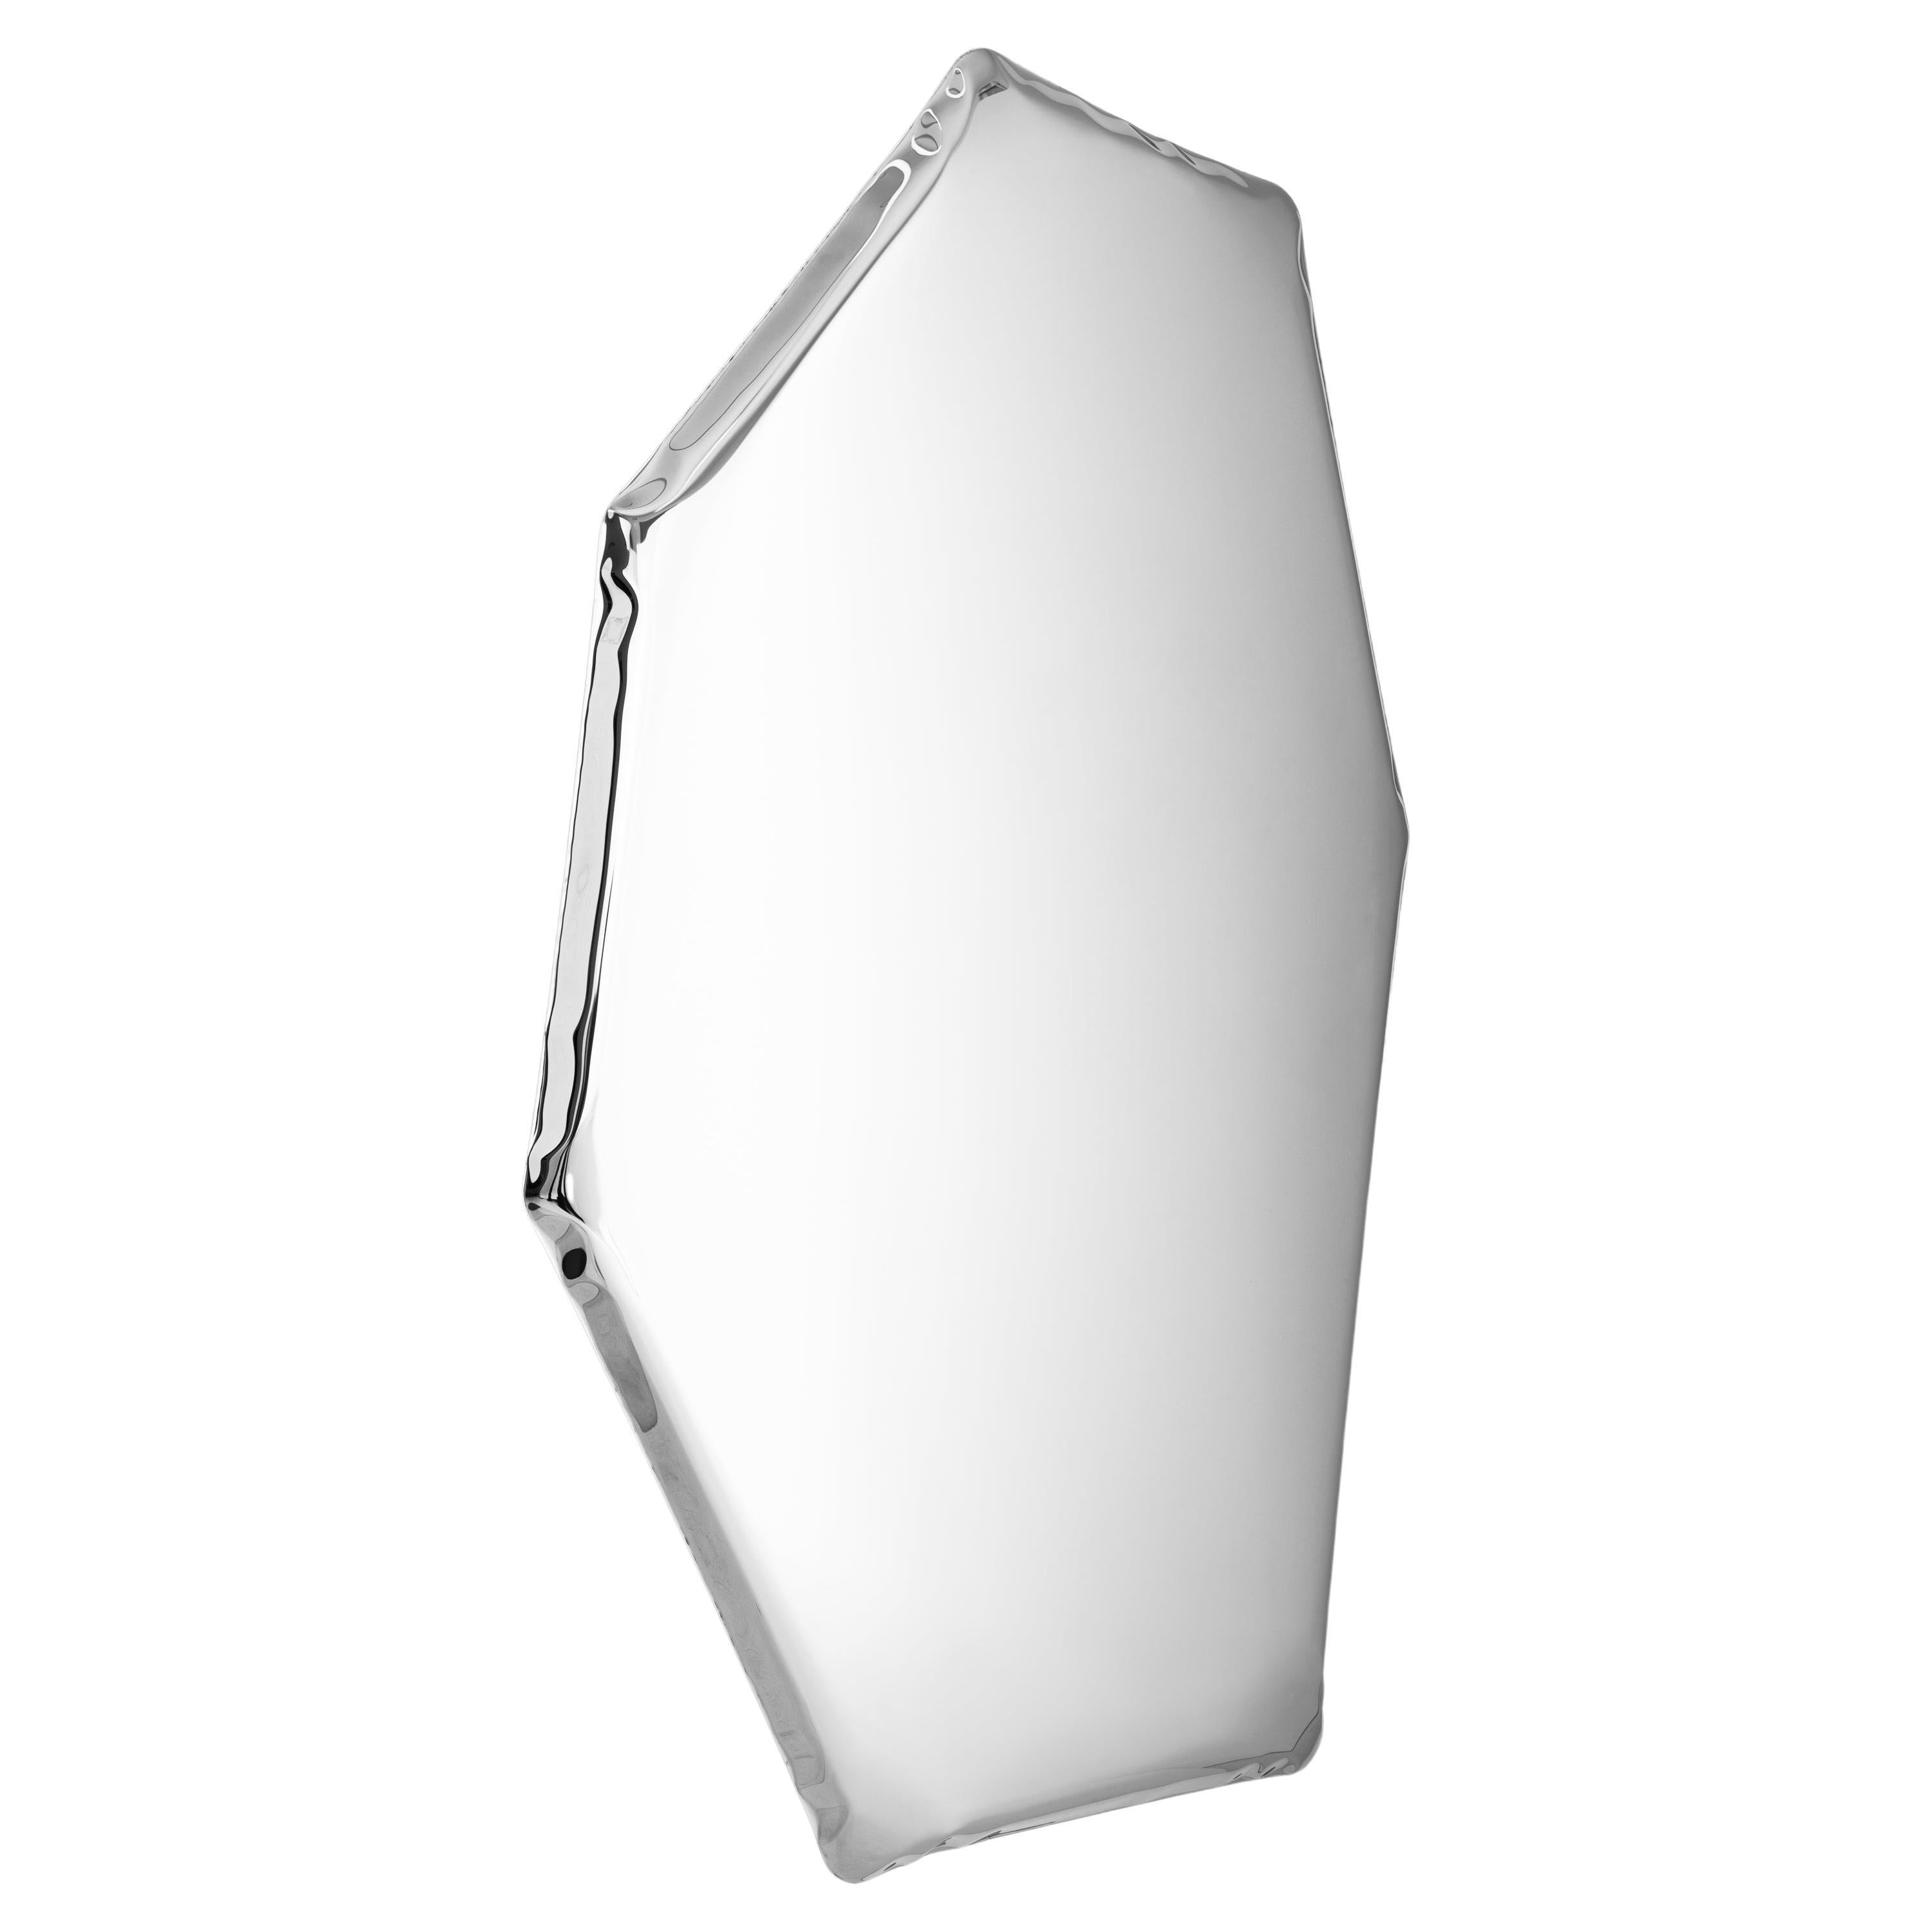 In Stock Tafla C2 Polished Stainless Steel Wall Mirror by Zieta For Sale